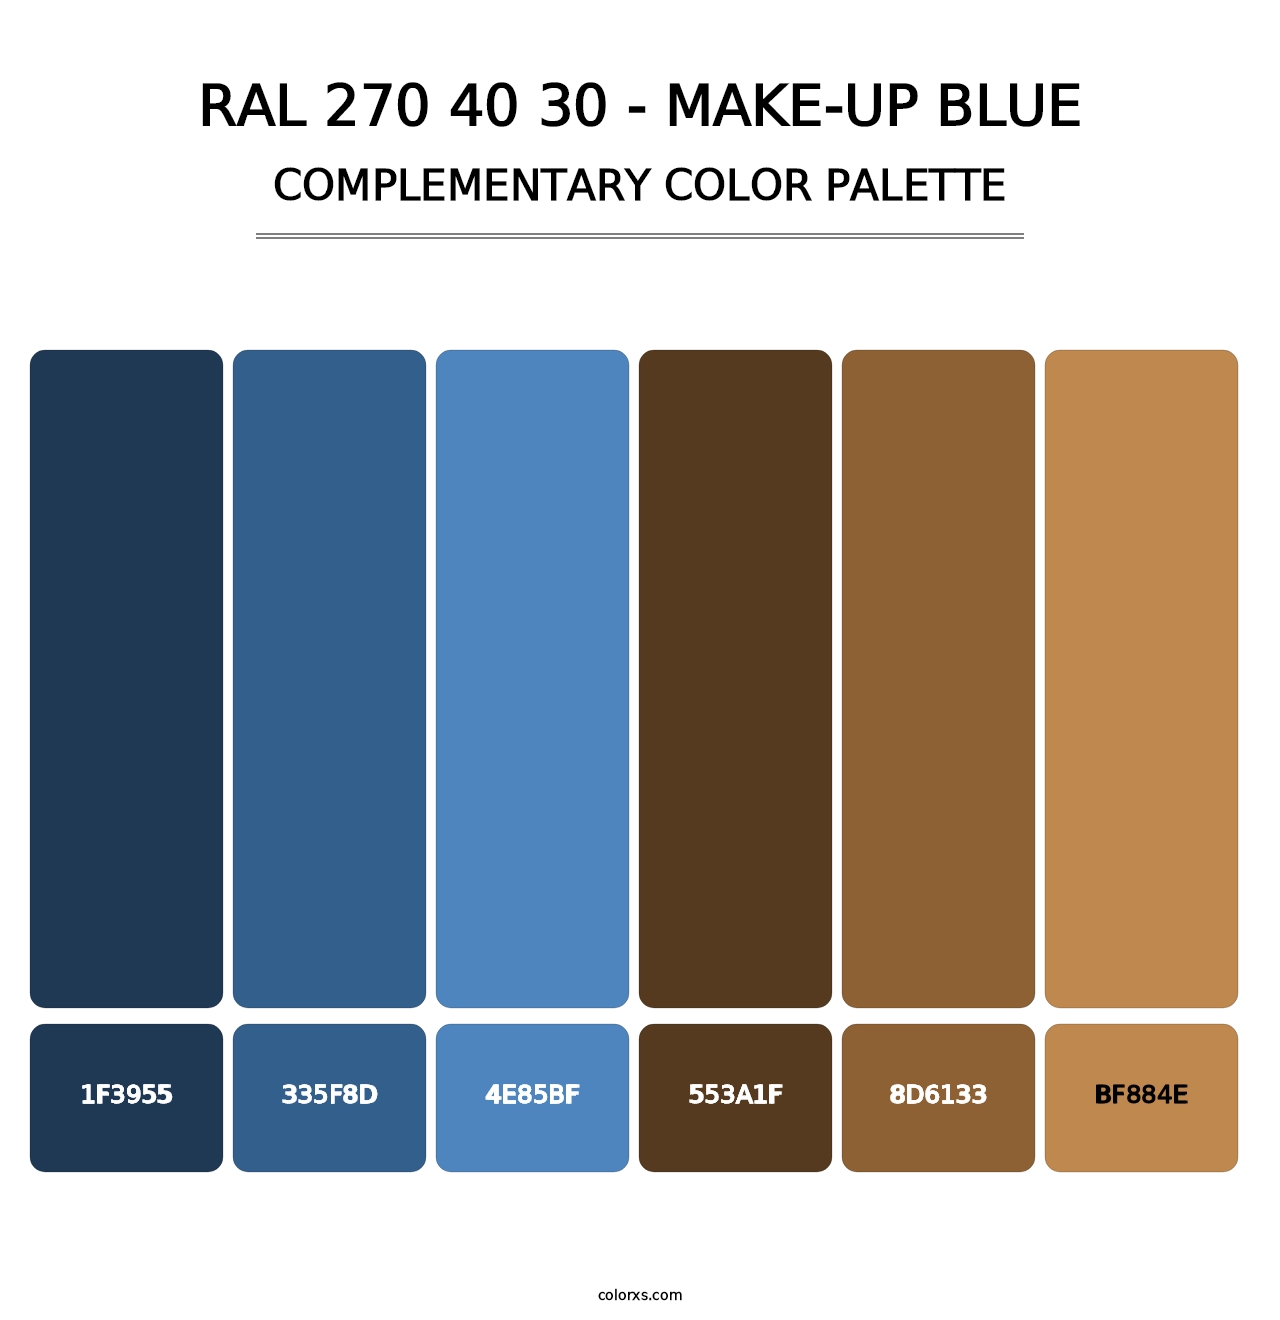 RAL 270 40 30 - Make-Up Blue - Complementary Color Palette